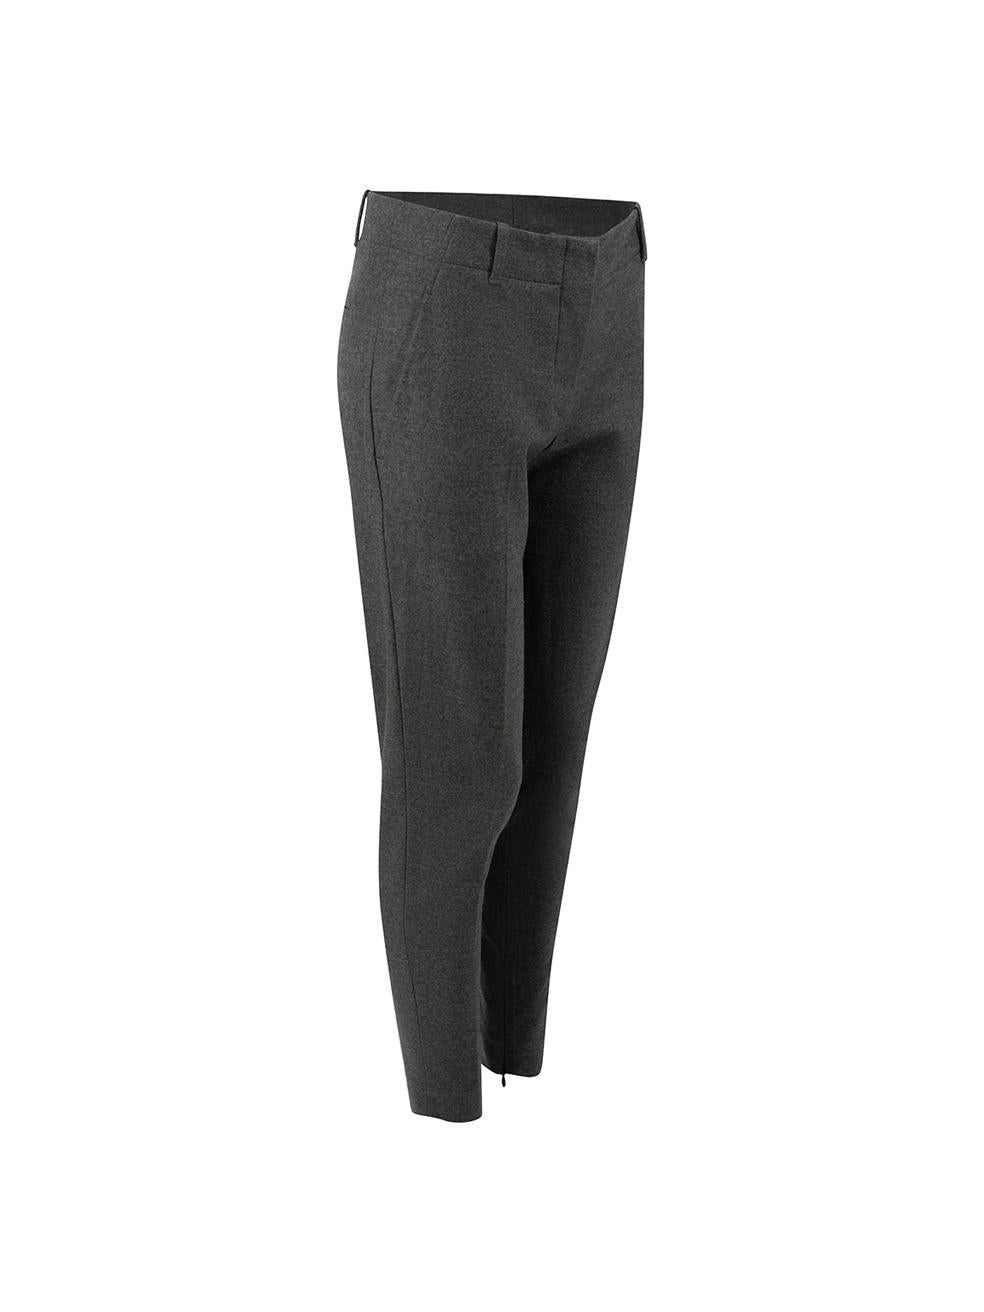 CONDITION is Very good. Hardly any visible wear to trousers is evident on this used Prada designer resale item.
  
  Details
  Grey
  Wool
  Trousers
  Slim fit
  Mid rise
  2x Side pockets
  2x Back pockets
  Fly zip, hook and button fastening
  
 